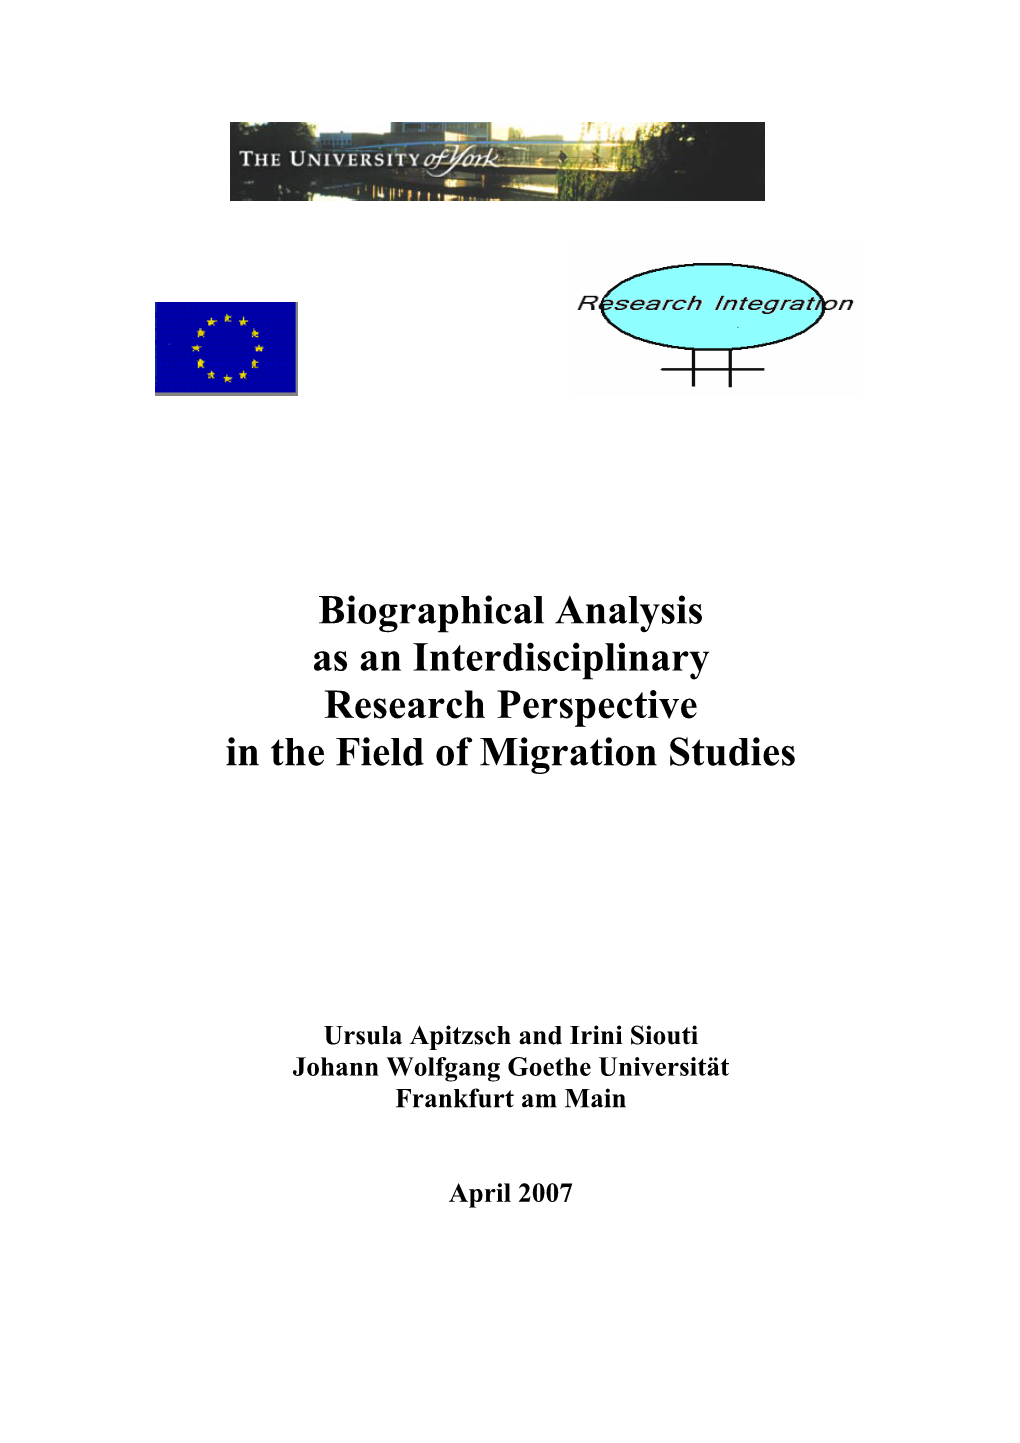 Biographical Analysis As an Interdisciplinary Research Perspective in the Field of Migration Studies